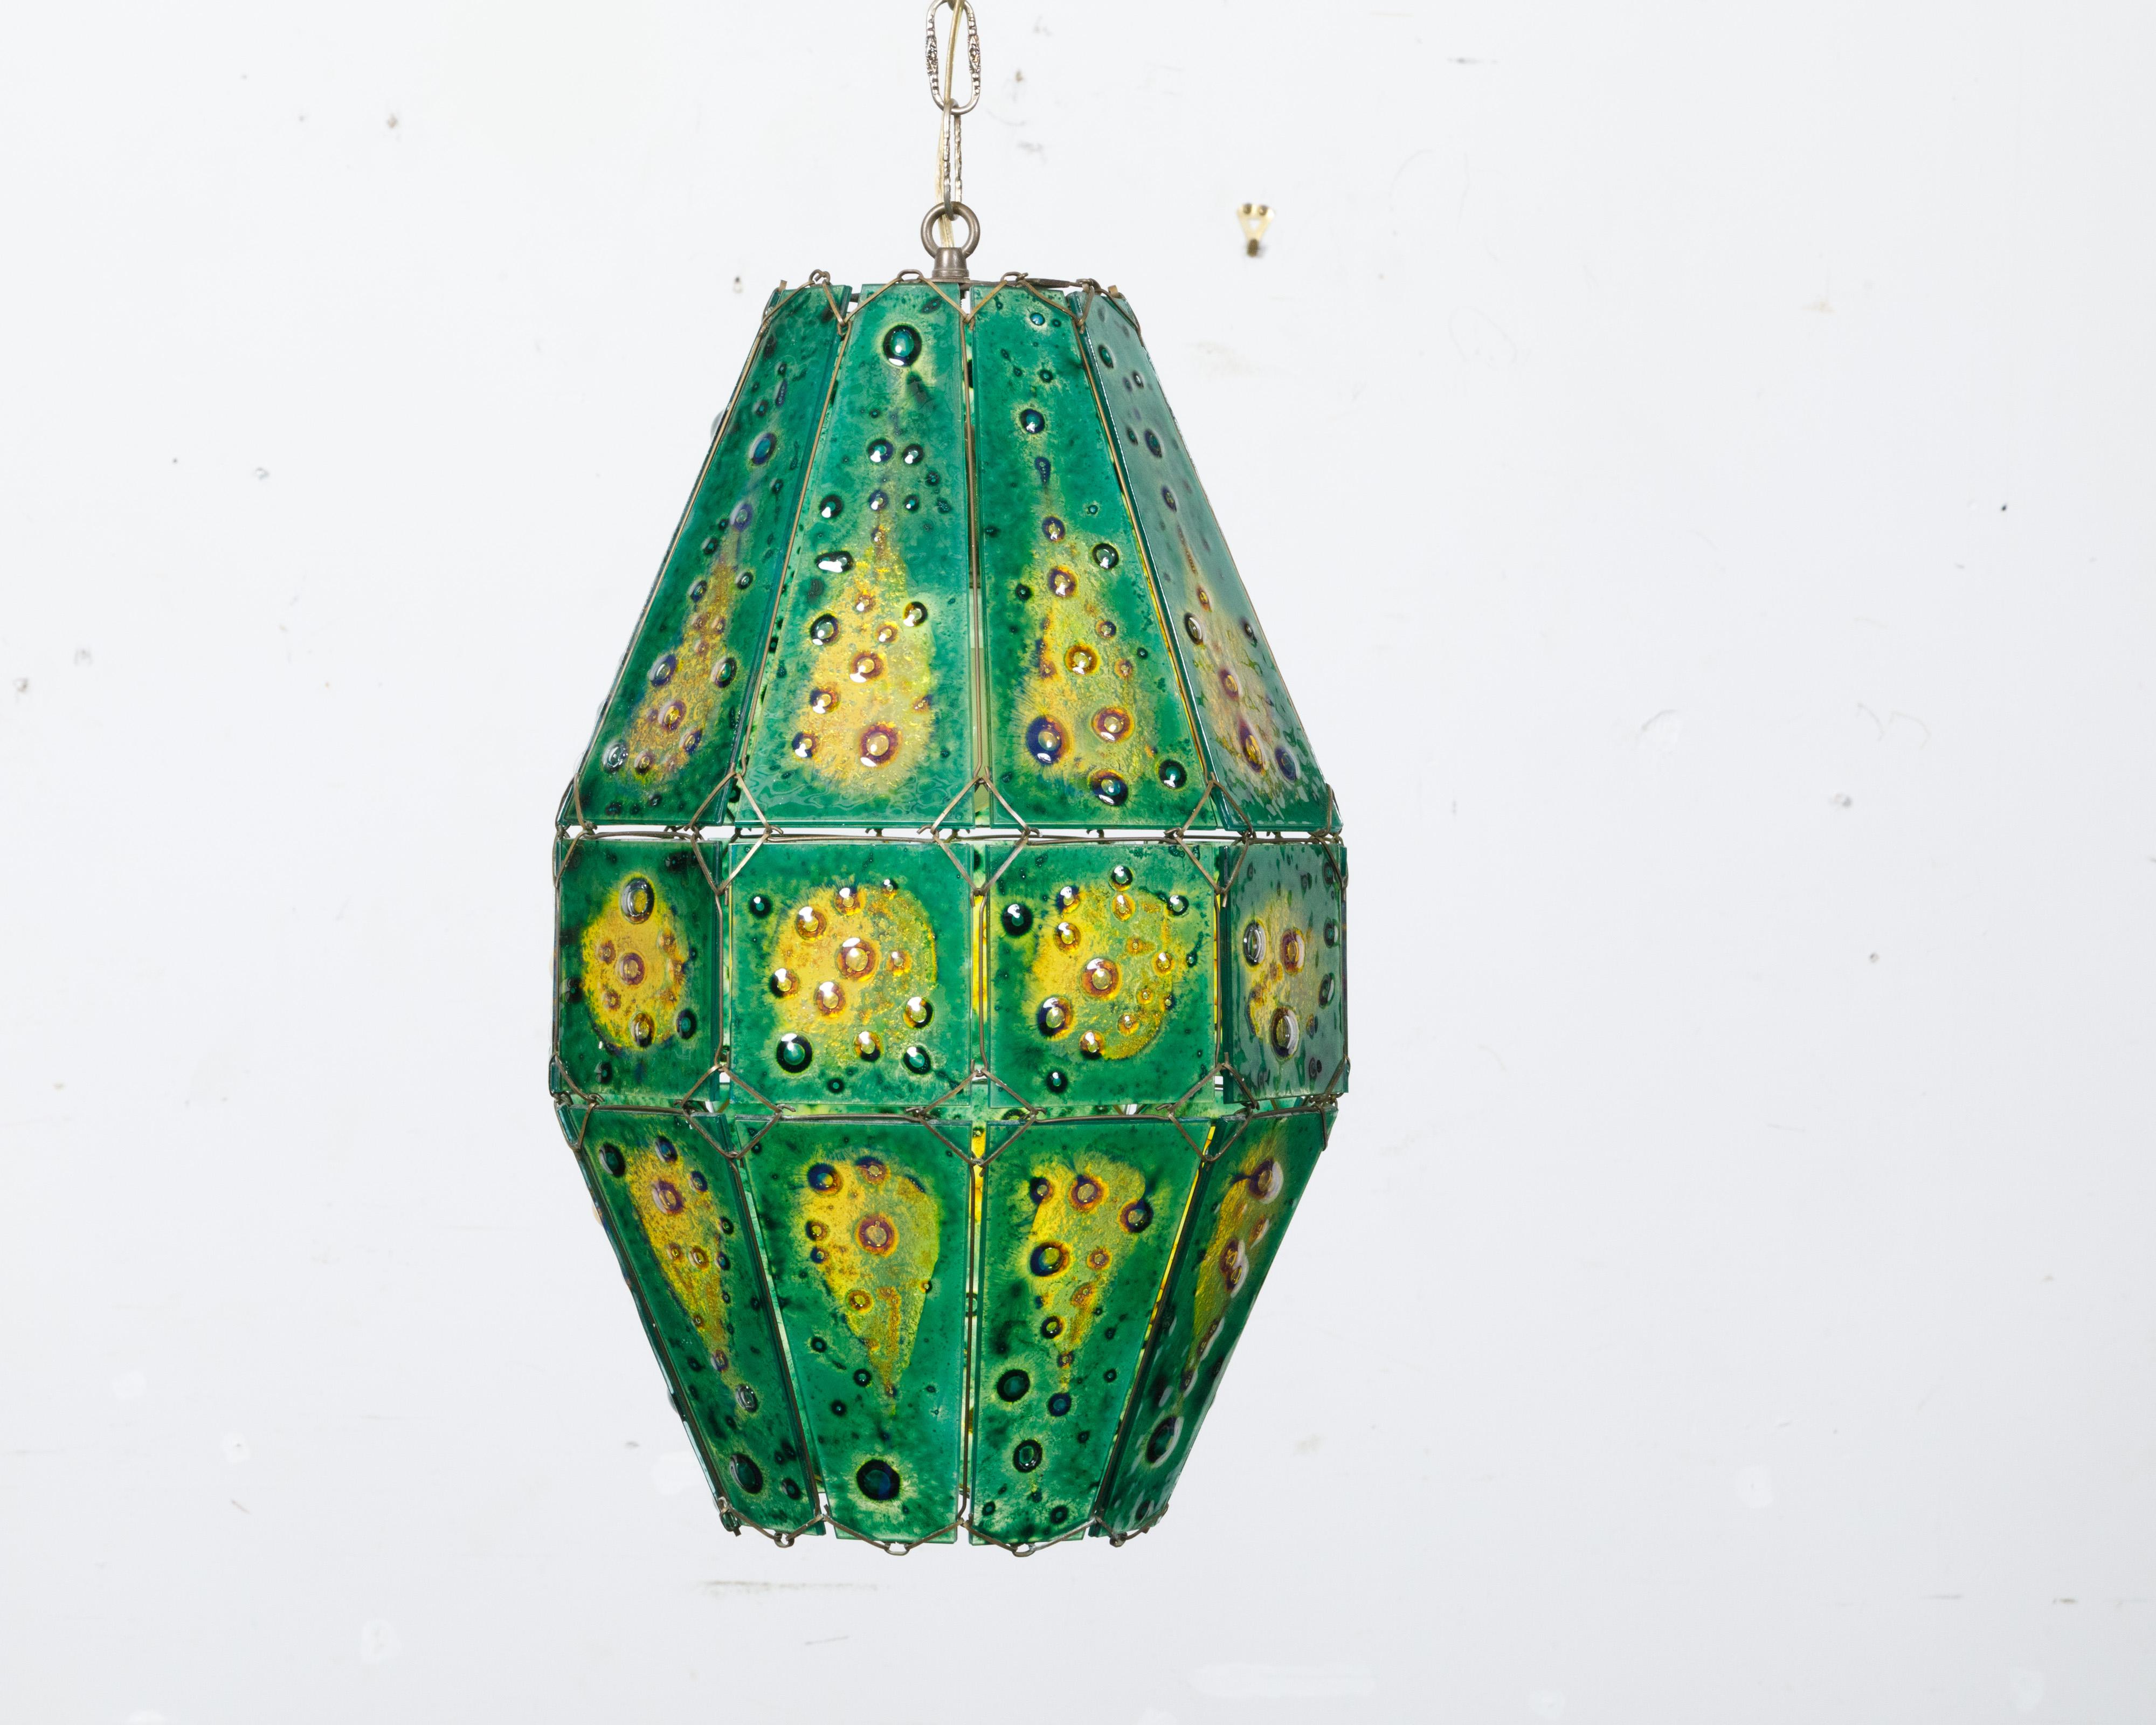 A Felipe Derflingher art glass pendant light fixture from circa 1970 with green and yellow tones. Crafted by the esteemed artist Felipe Derflingher around the 1970s, this art glass pendant light fixture is a brilliant representation of mid-century